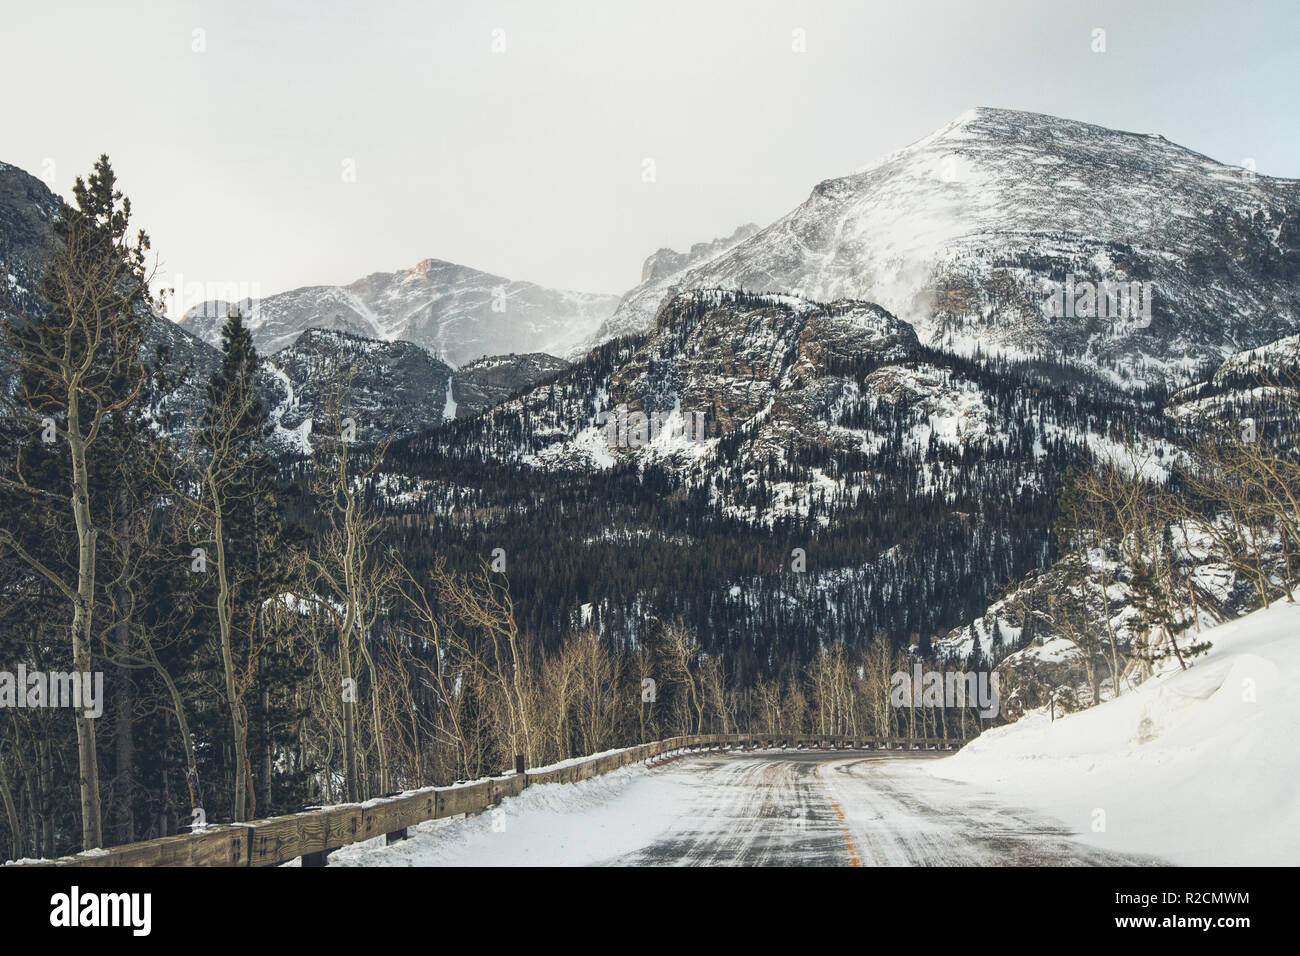 A snowy road winds through the Rocky Mountains in winter Stock Photo